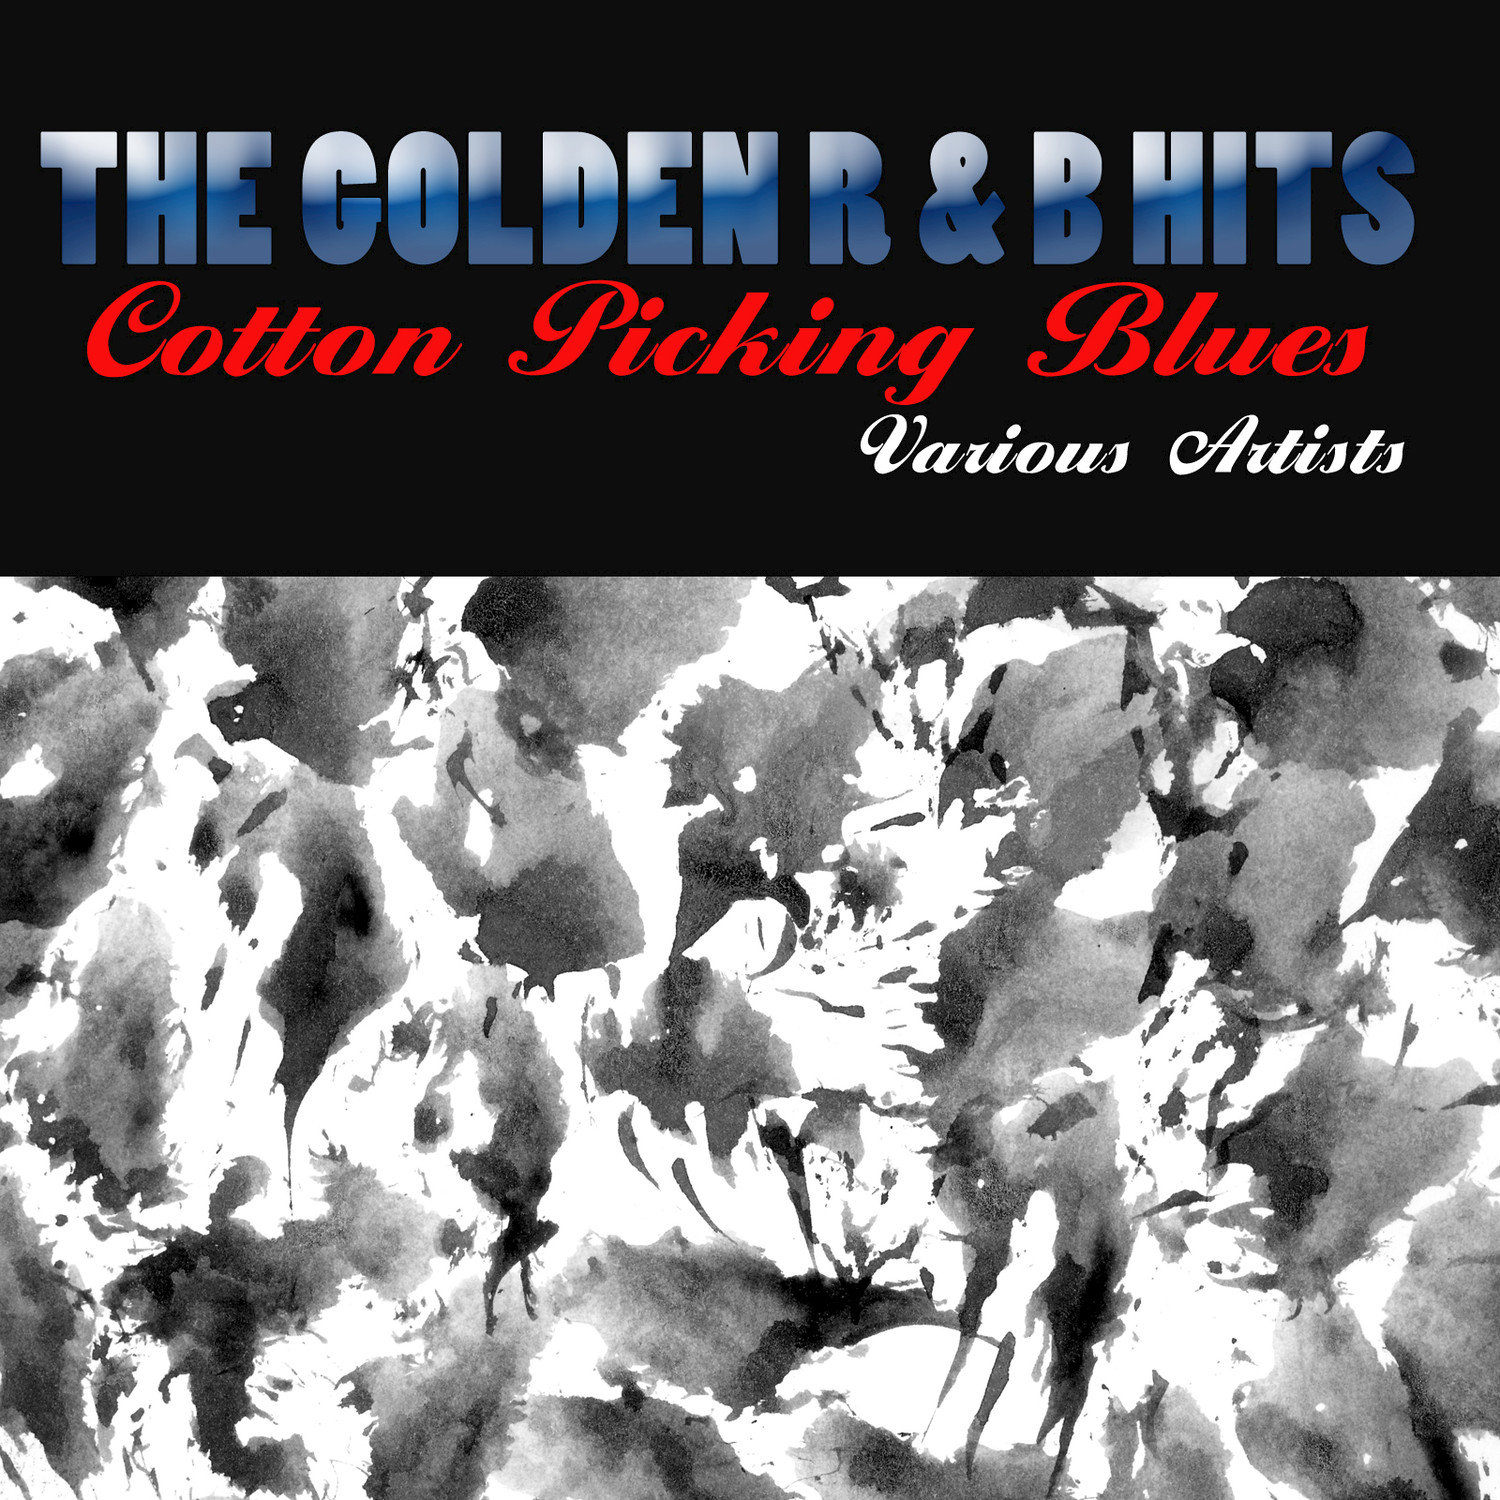 The Golden R & B Hits: Cotton Picking Blues